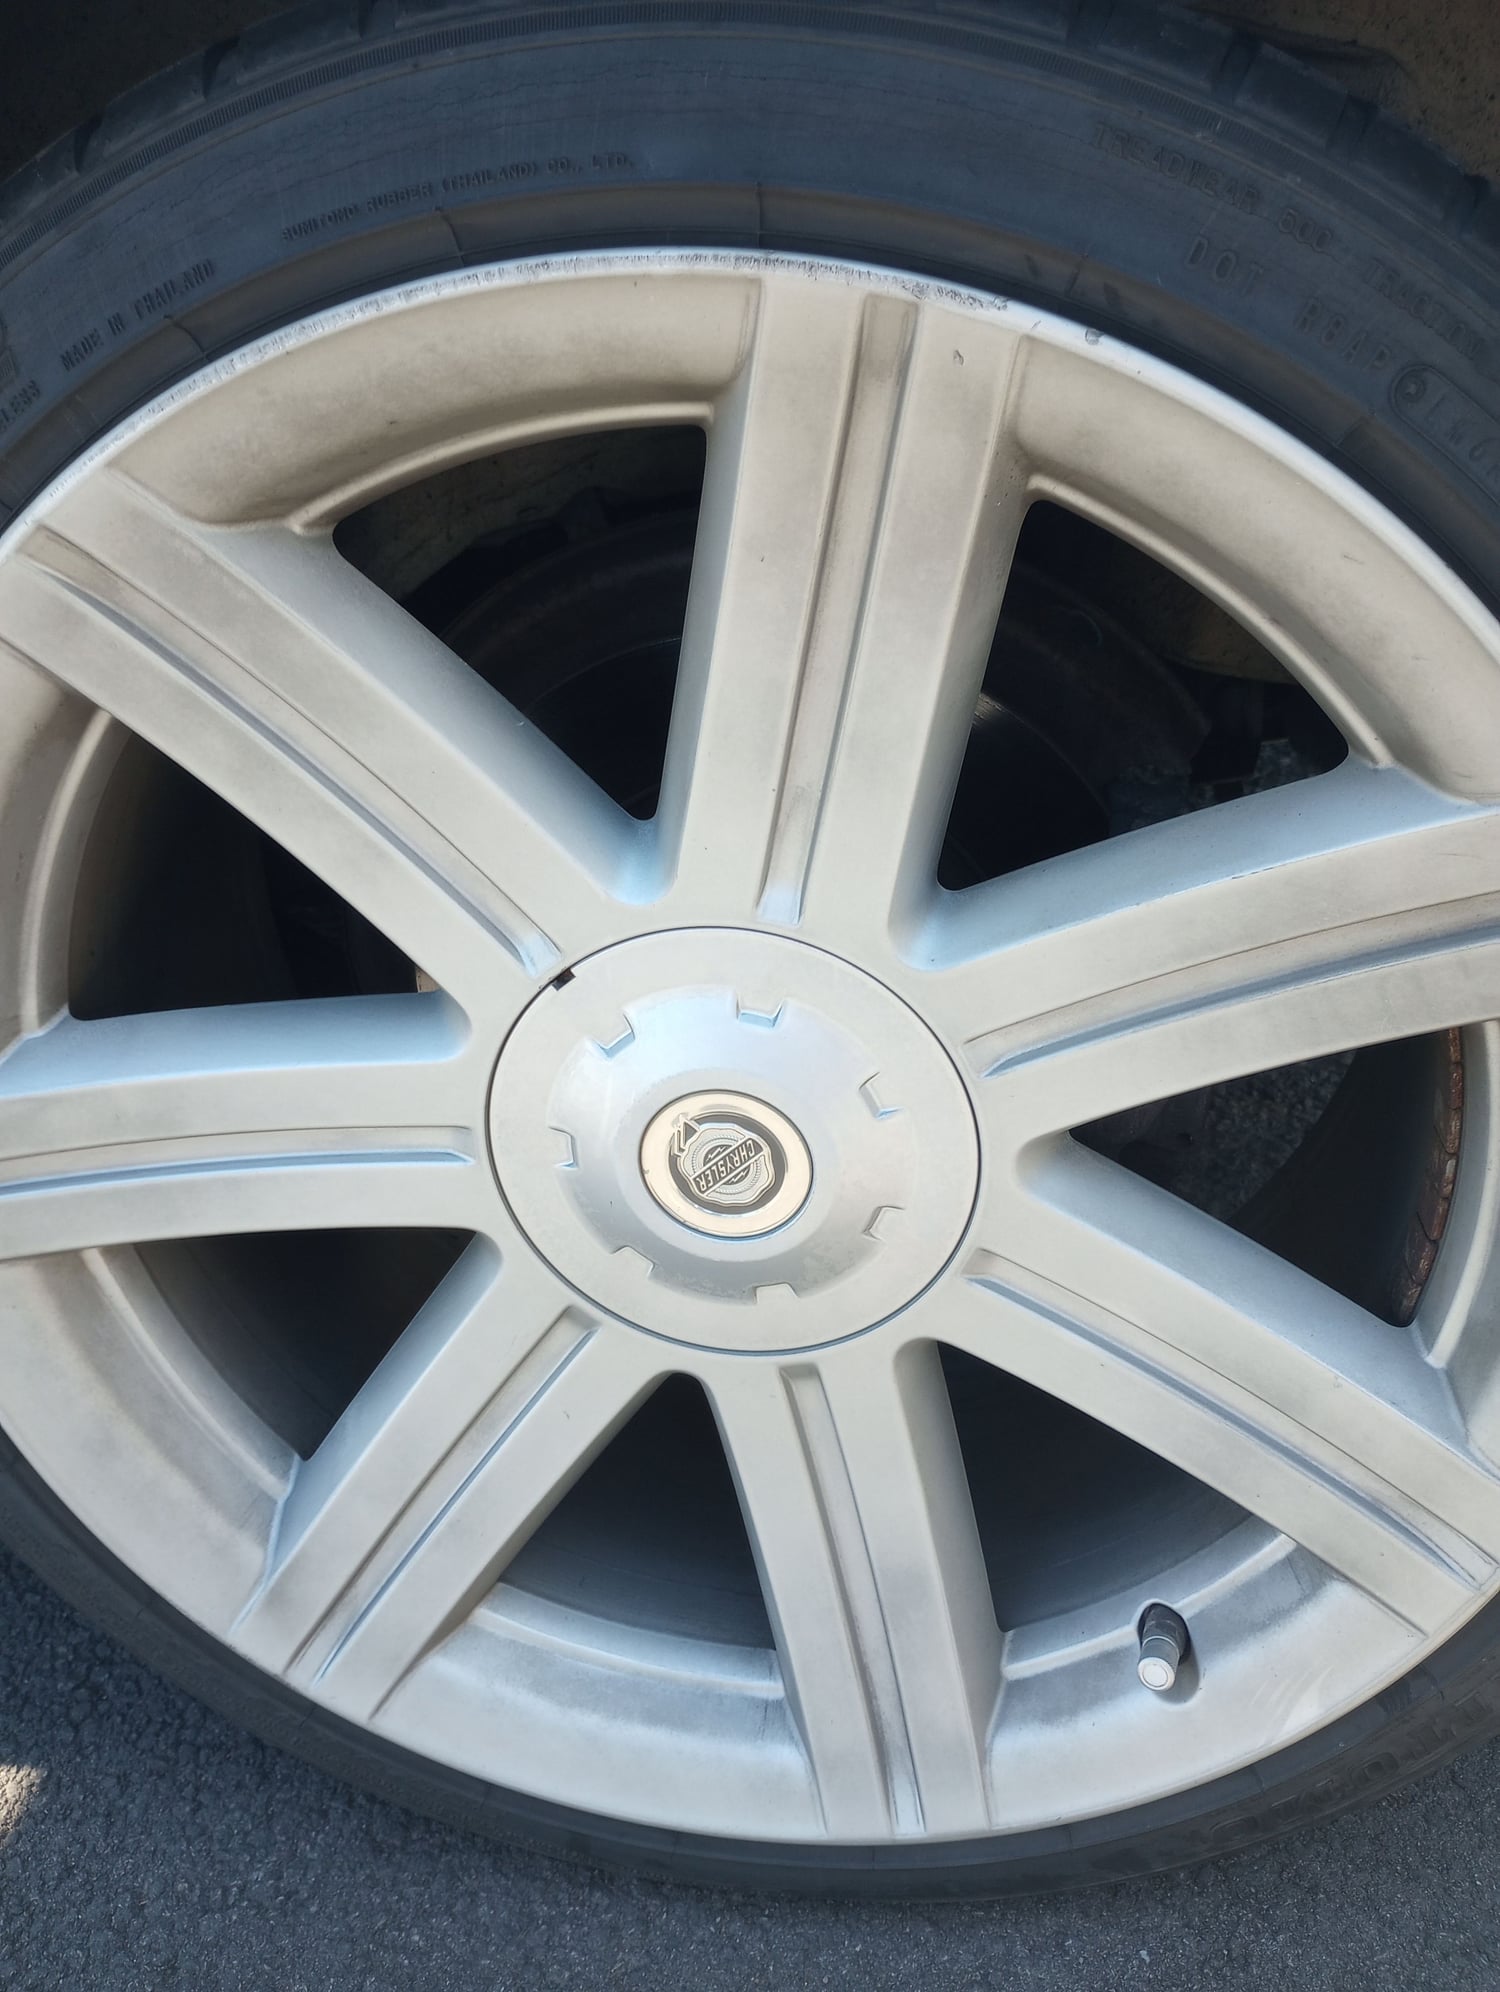 2004 Chrysler Crossfire - 4 rims available 2 18 inch and 2 19 inch for 100 a piece - Scranton, PA 18505, United States